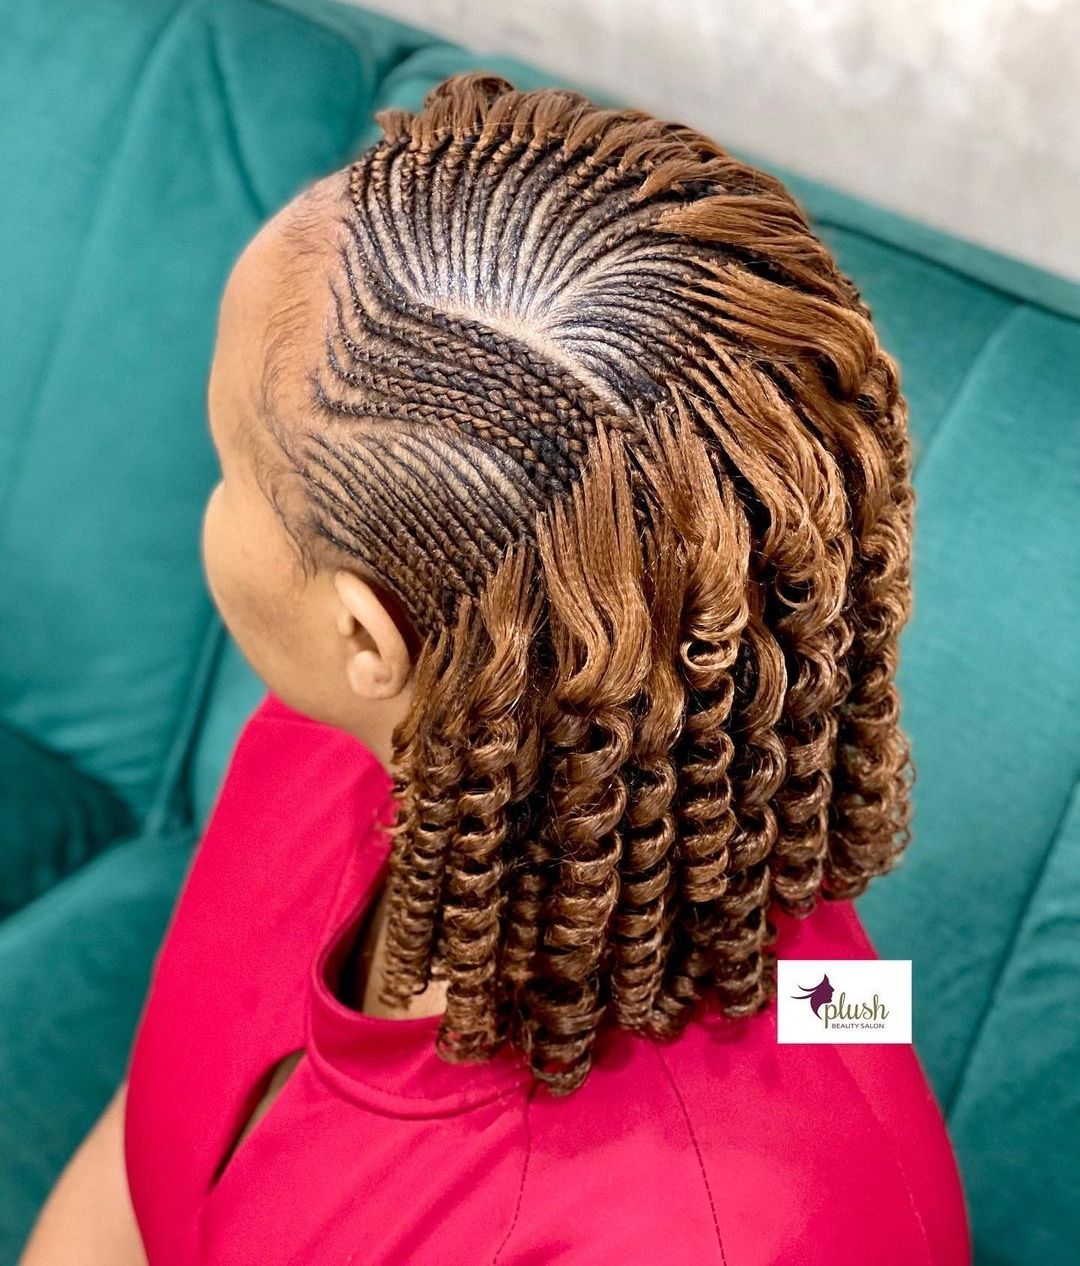 50 Iconic Braids and Modern Types of Braids